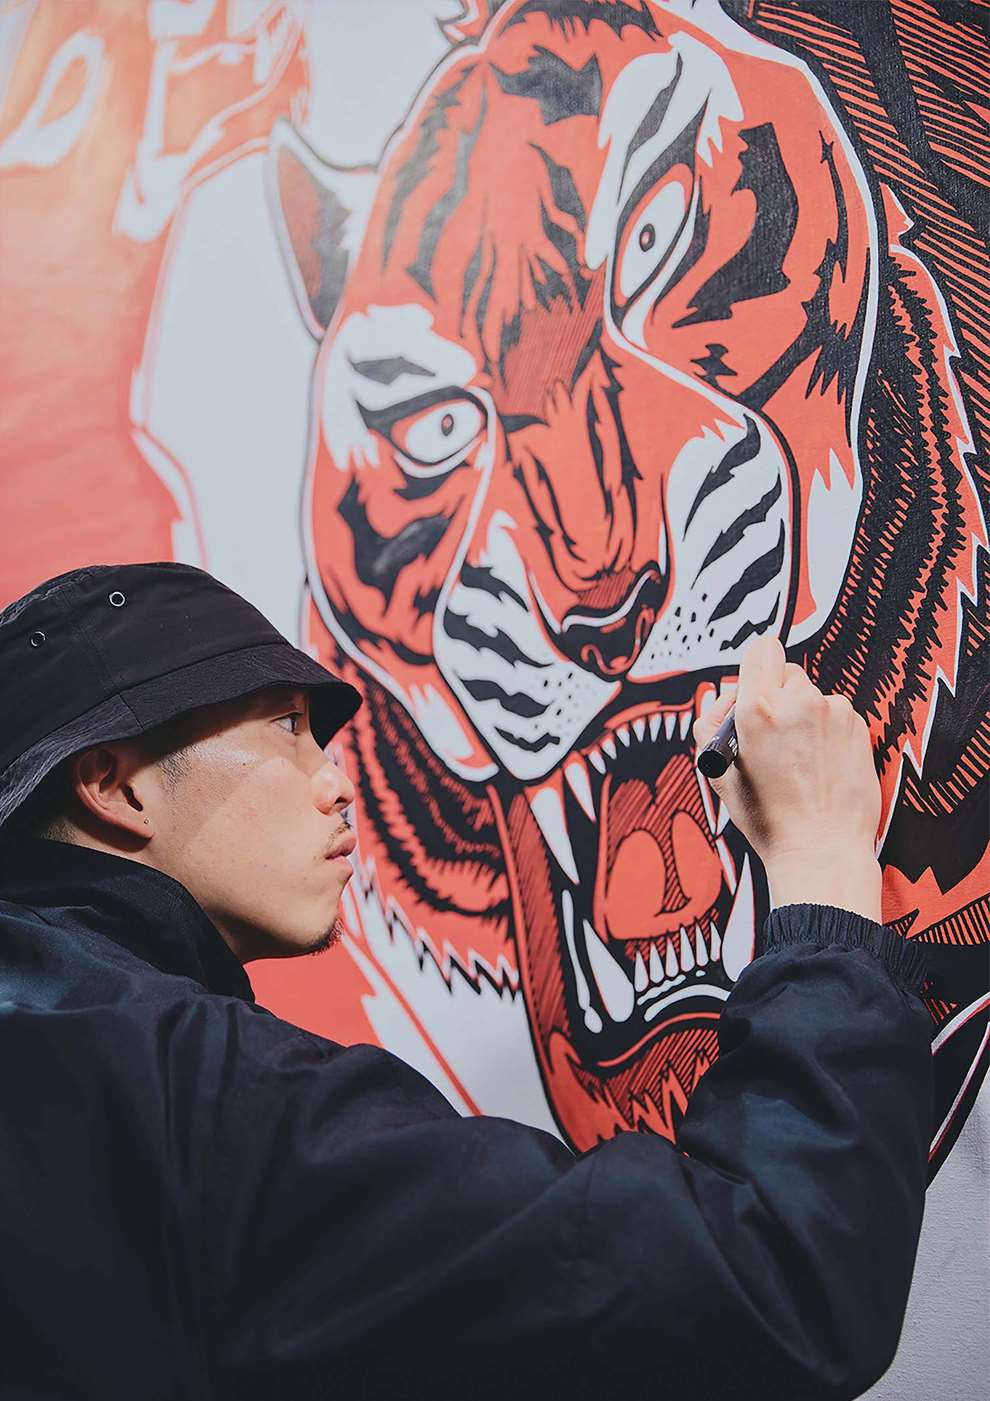 Mr Lee, Large scale live drawing mural of a tiger for Nike London. Photograph of Mr Lee live drawing.